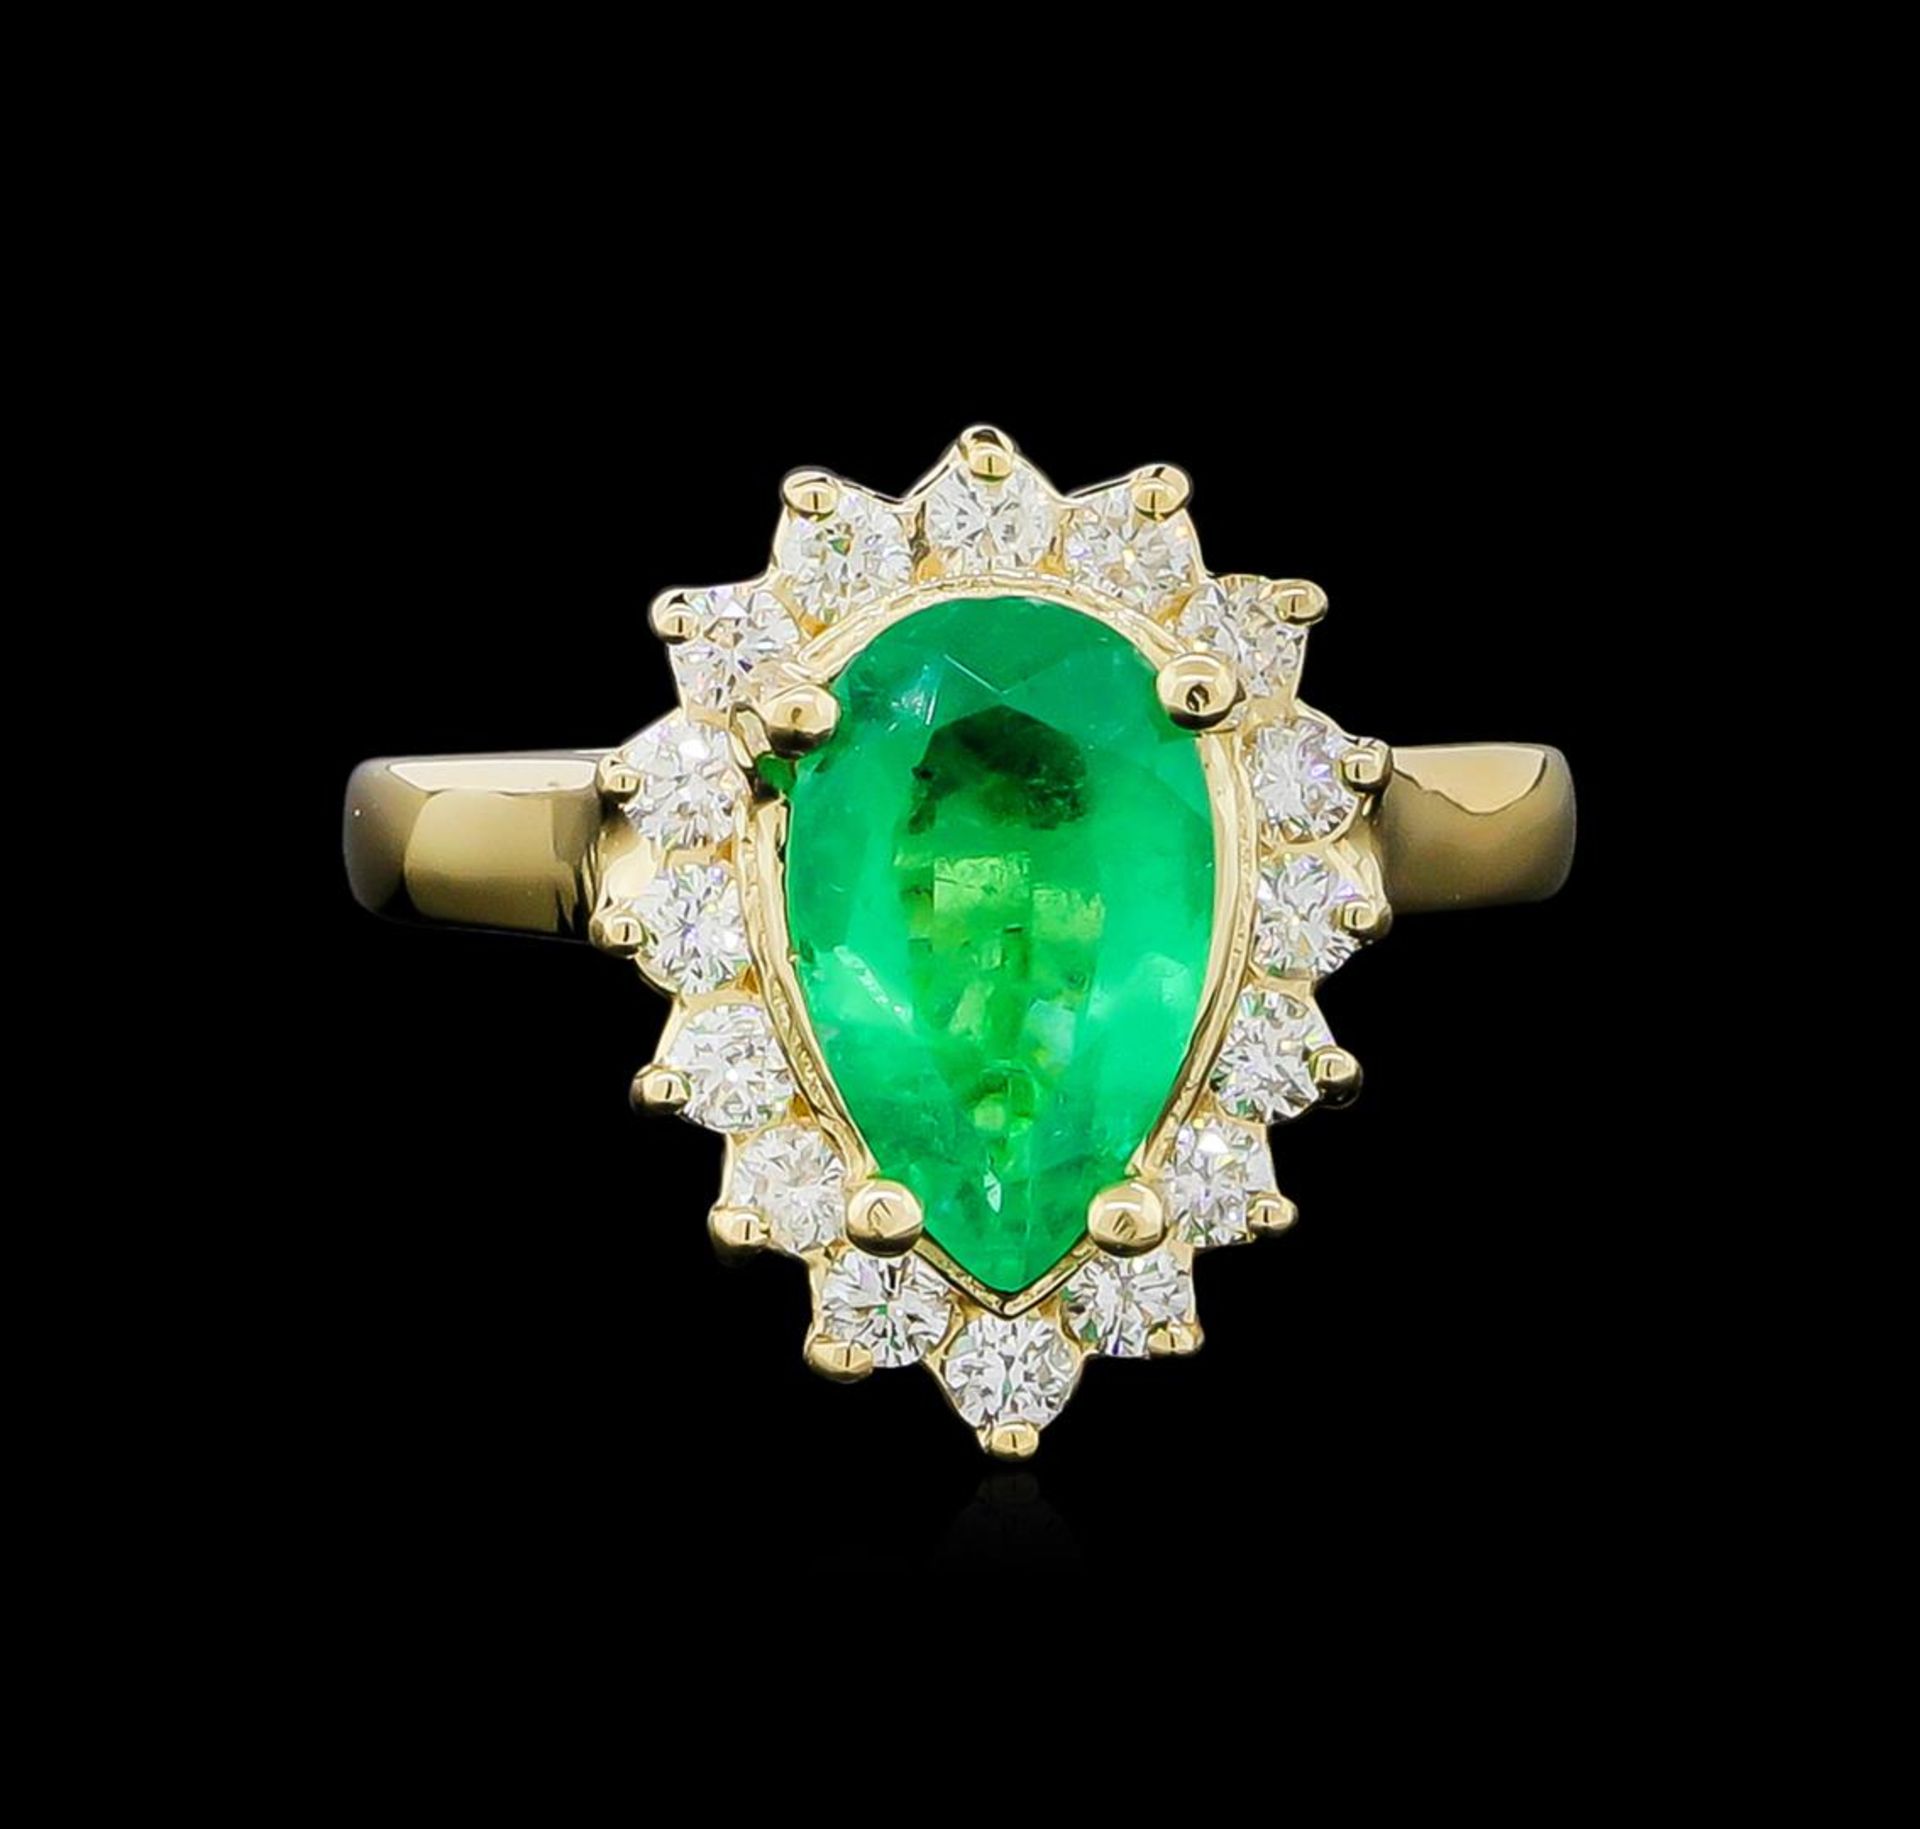 1.73 ctw Emerald and Diamond Ring - 14KT Yellow Gold - Image 2 of 4